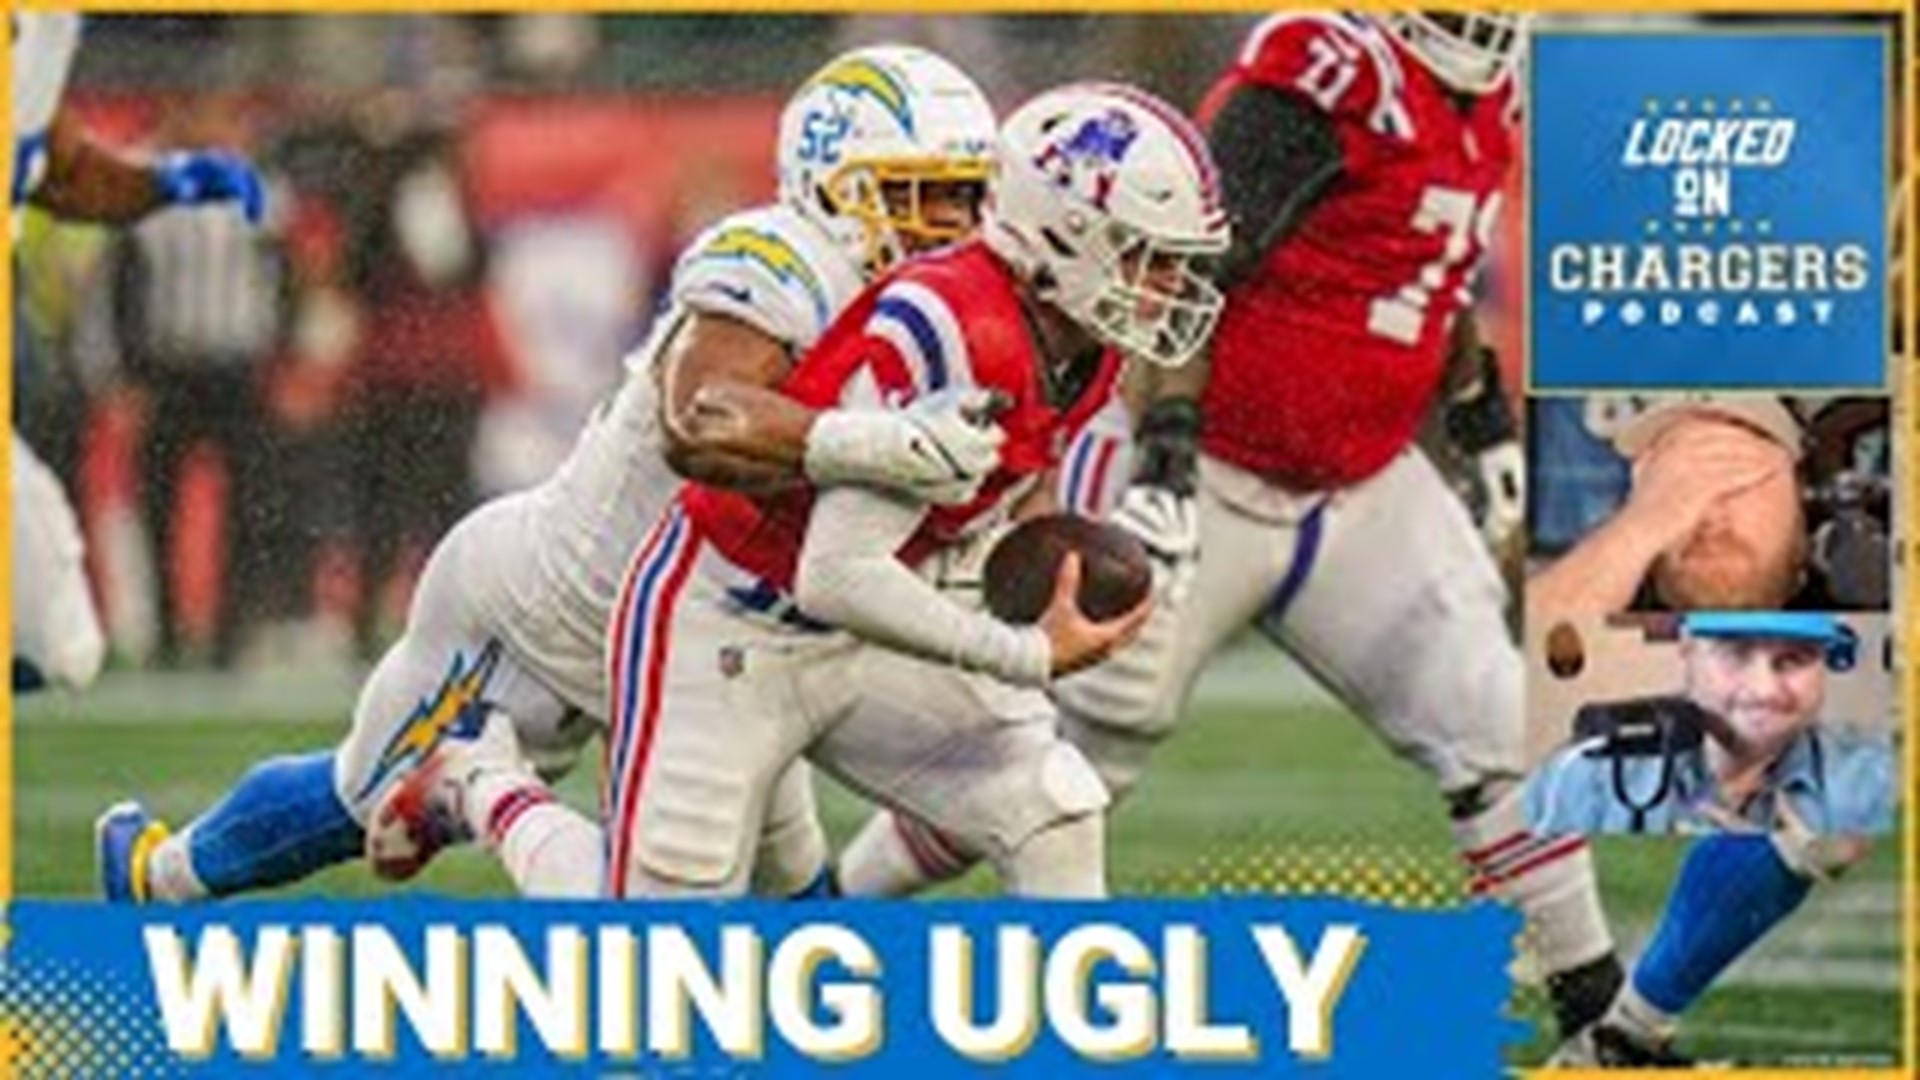 The Chargers did what they had to do in New England on Sunday battling the rough conditions to pull out a sloppy win against a bad team.